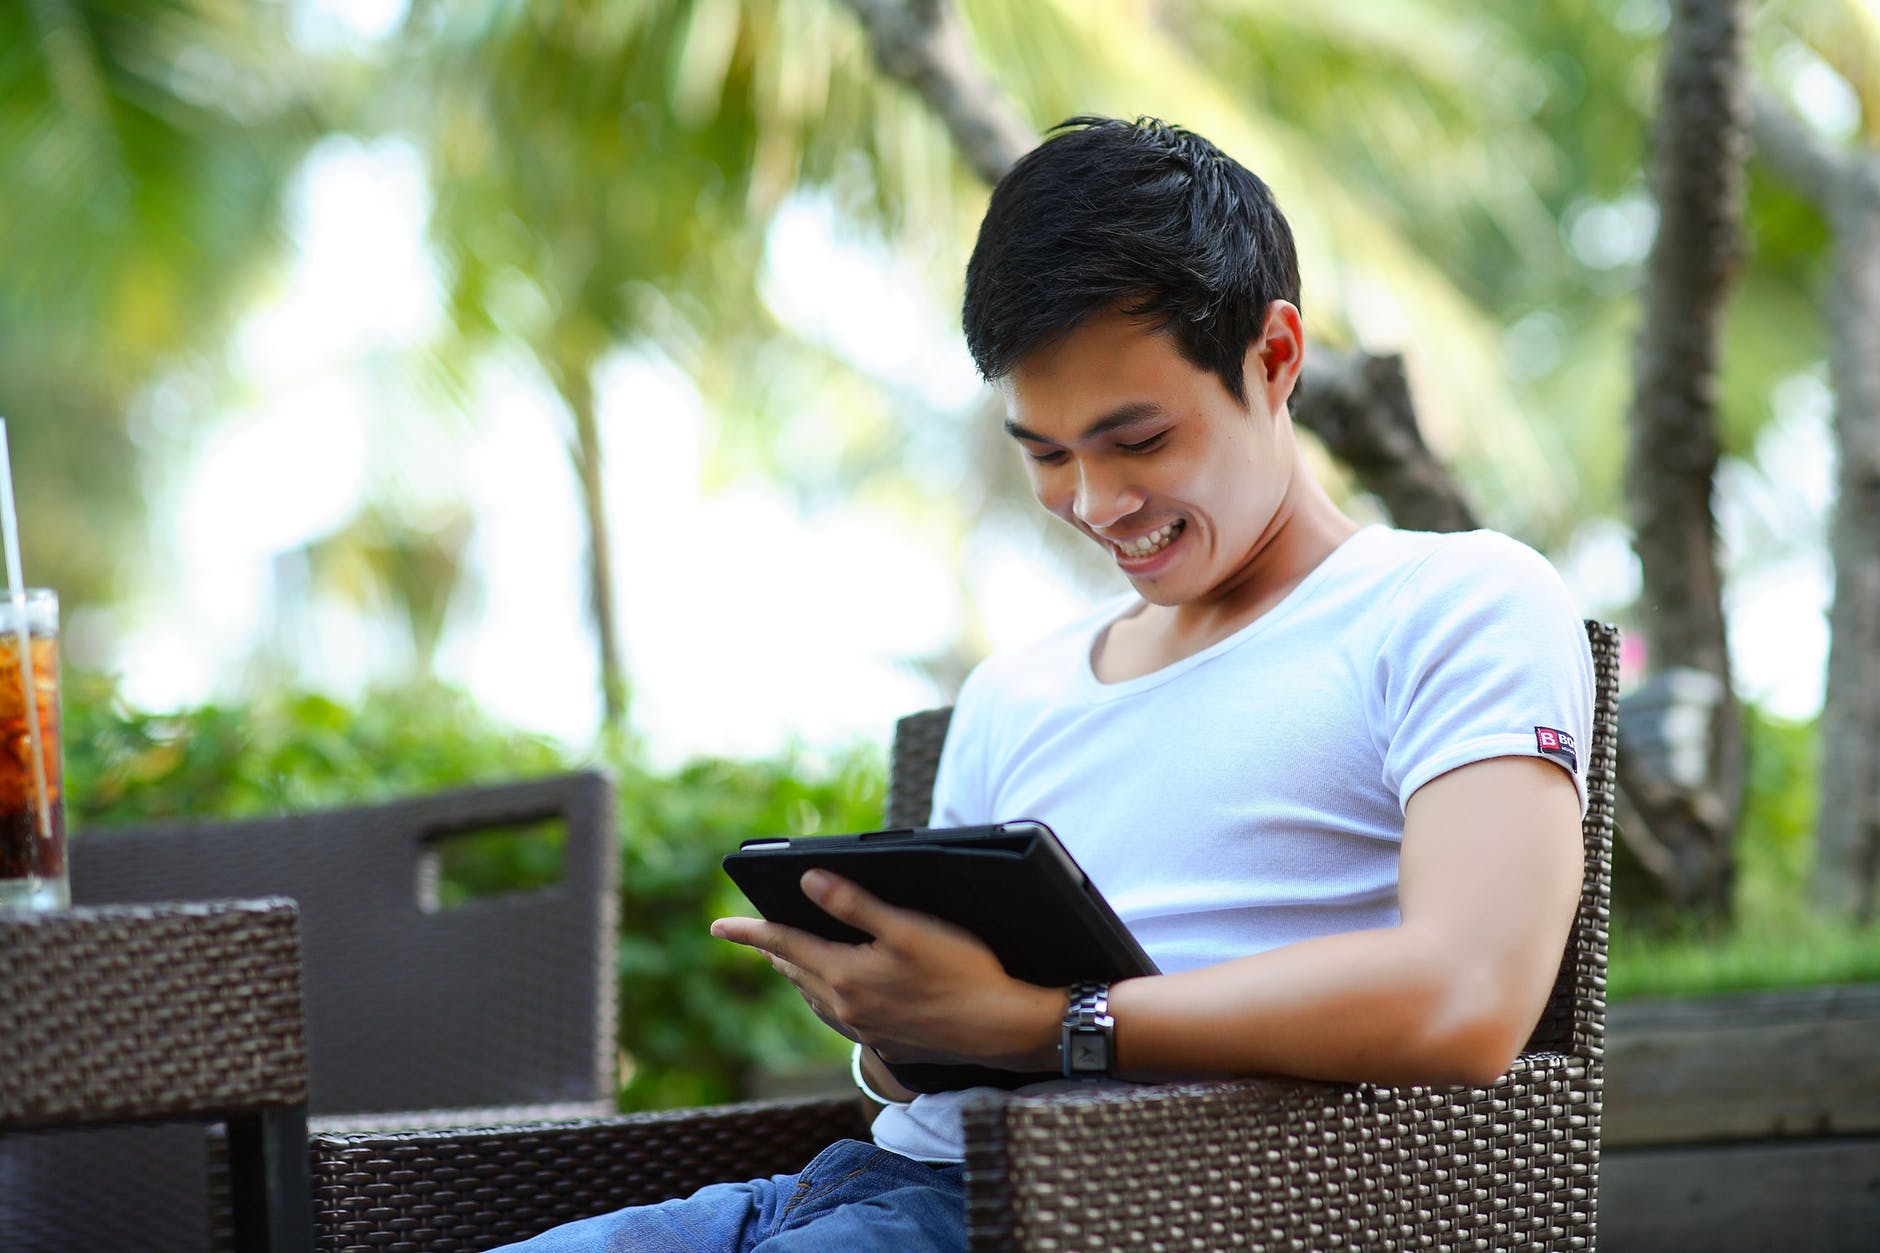 Man sitting outside smiling at his tablet PC